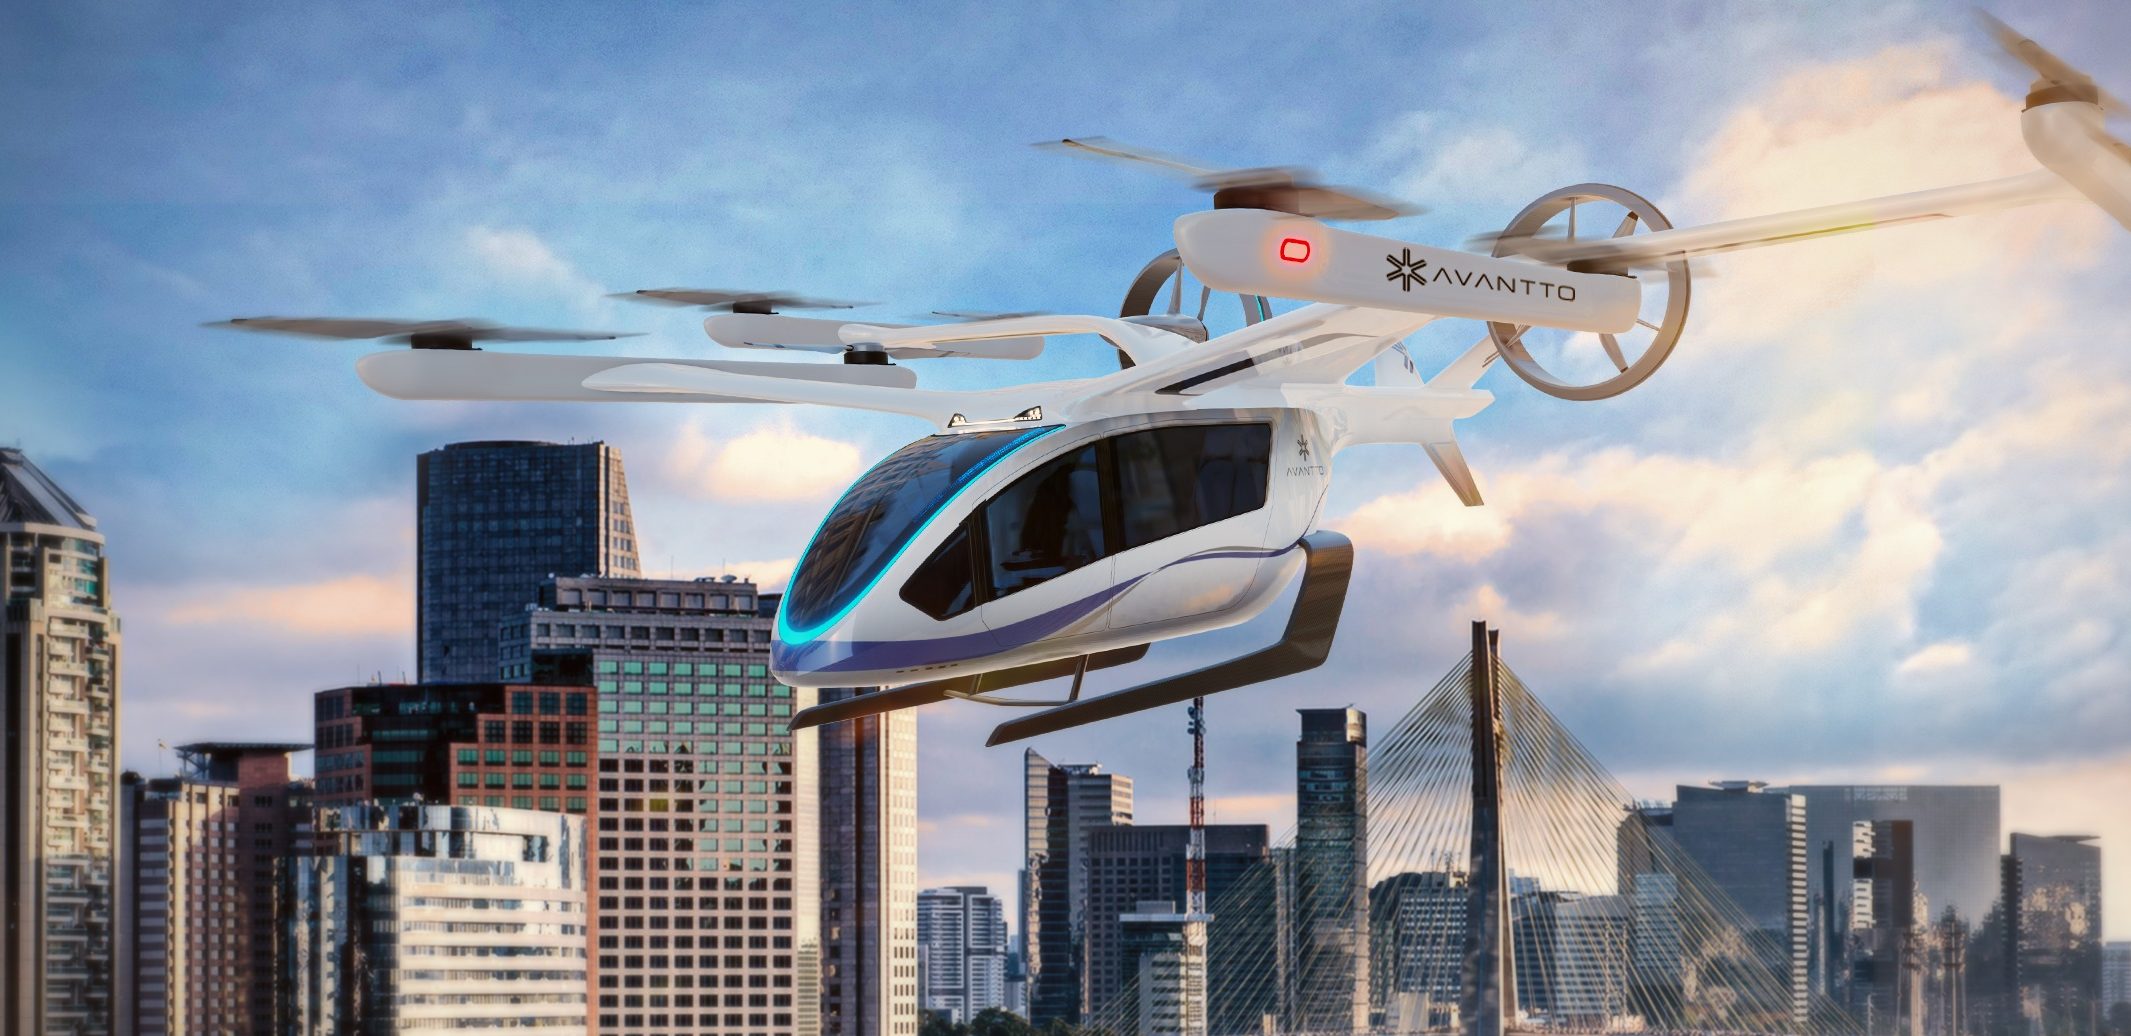 Eve and Avantto to develop Urban Air Mobility (UAM) operations in Brazil and Latin America